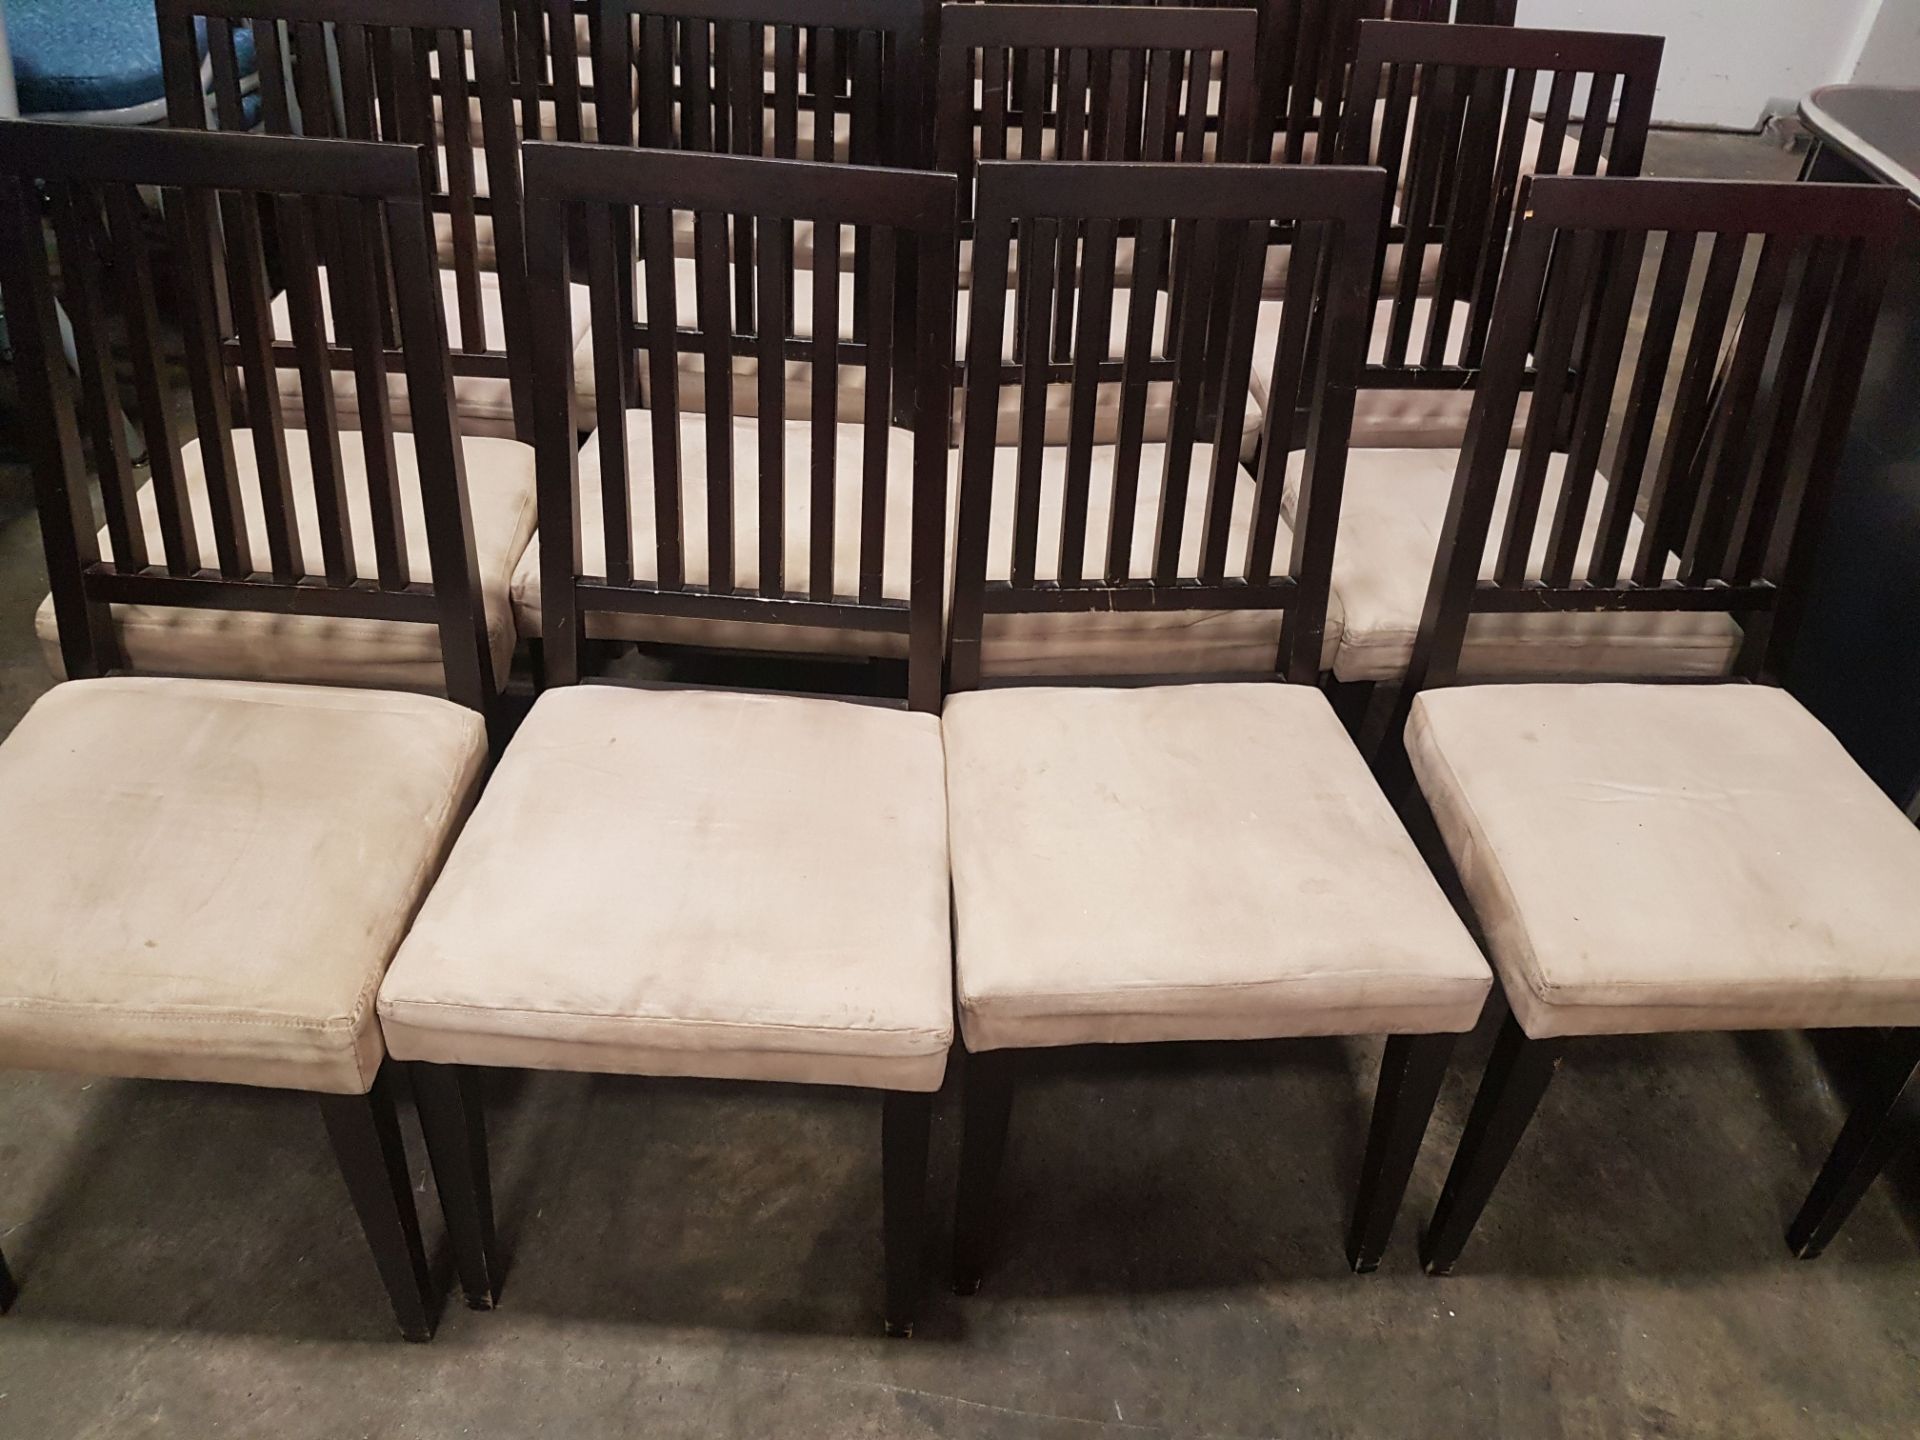 Wood Chairs with Padded Seats - Image 8 of 12